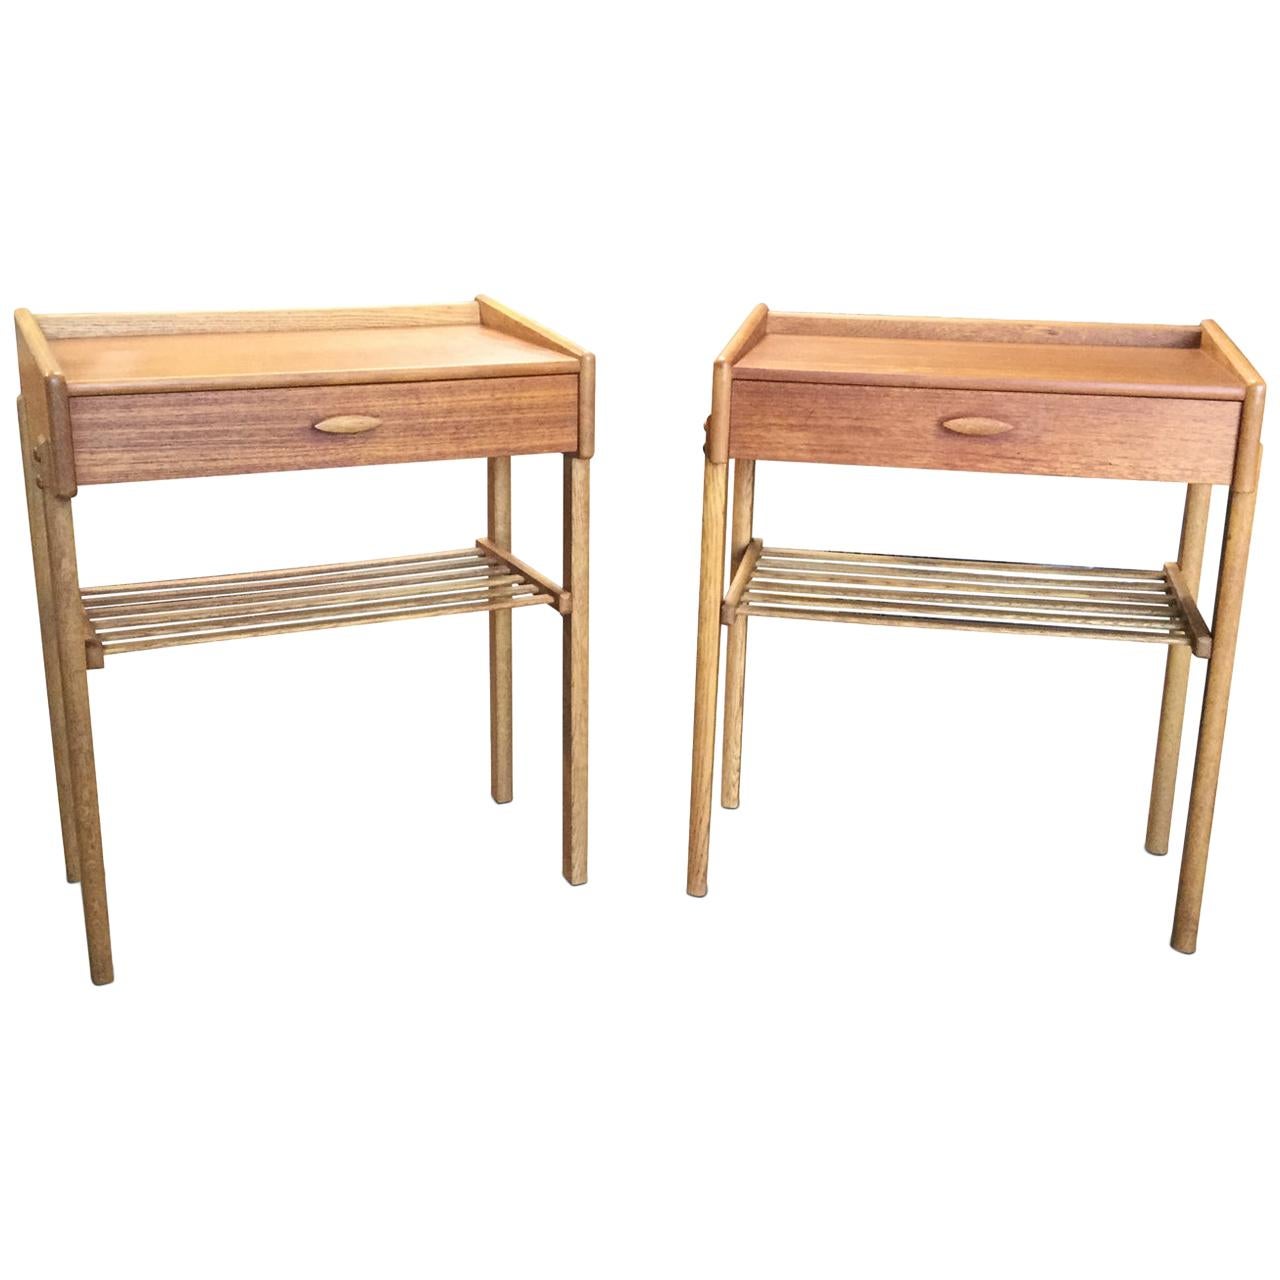 Pair of Midcentury Maple Wood End Tables